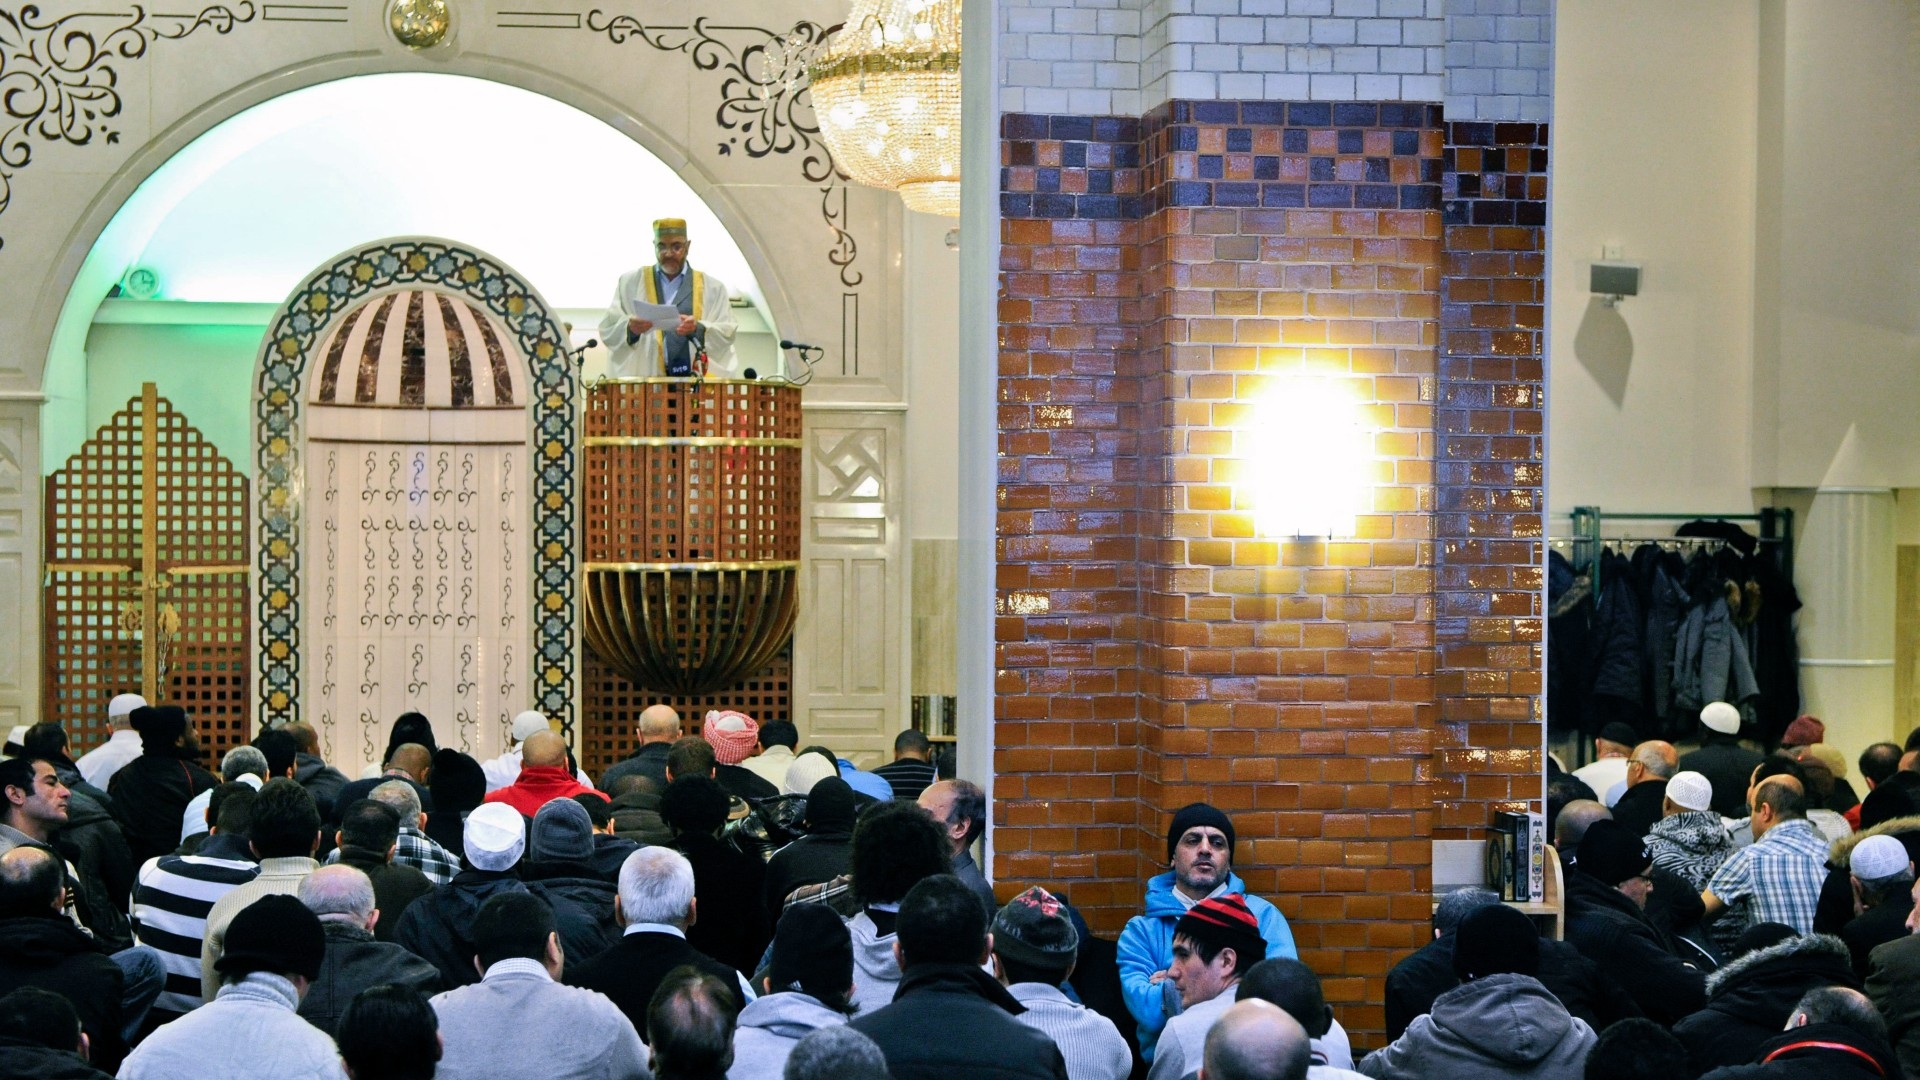 A picture taken during Friday prayers at Stockholm's largest mosque, on 17 December 2010 (AFP)